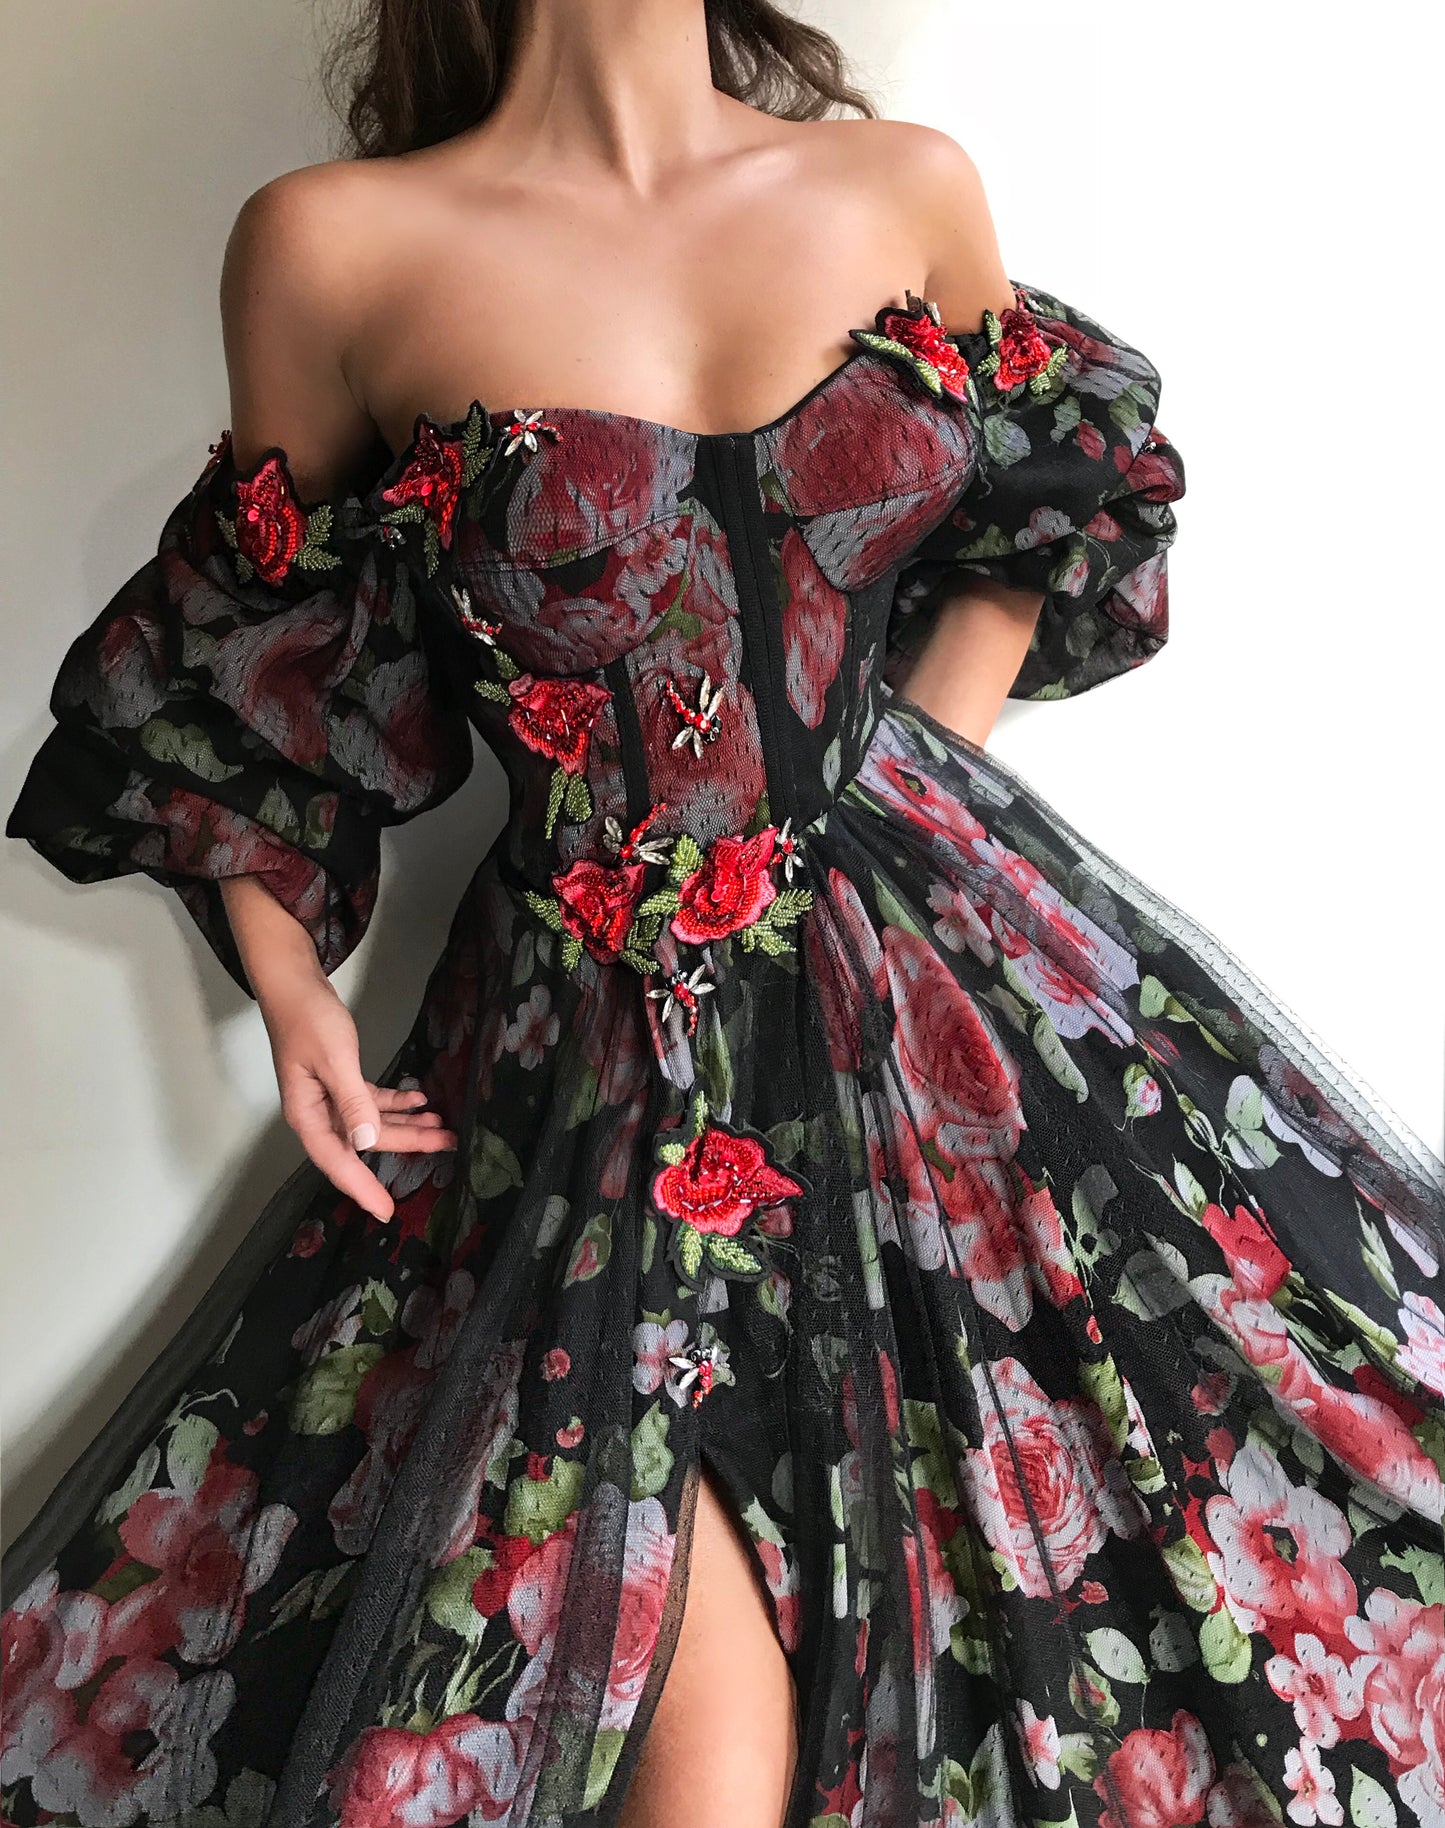 Black A-Line dress with off the shoulder sleeves, embroidery and printed flowers